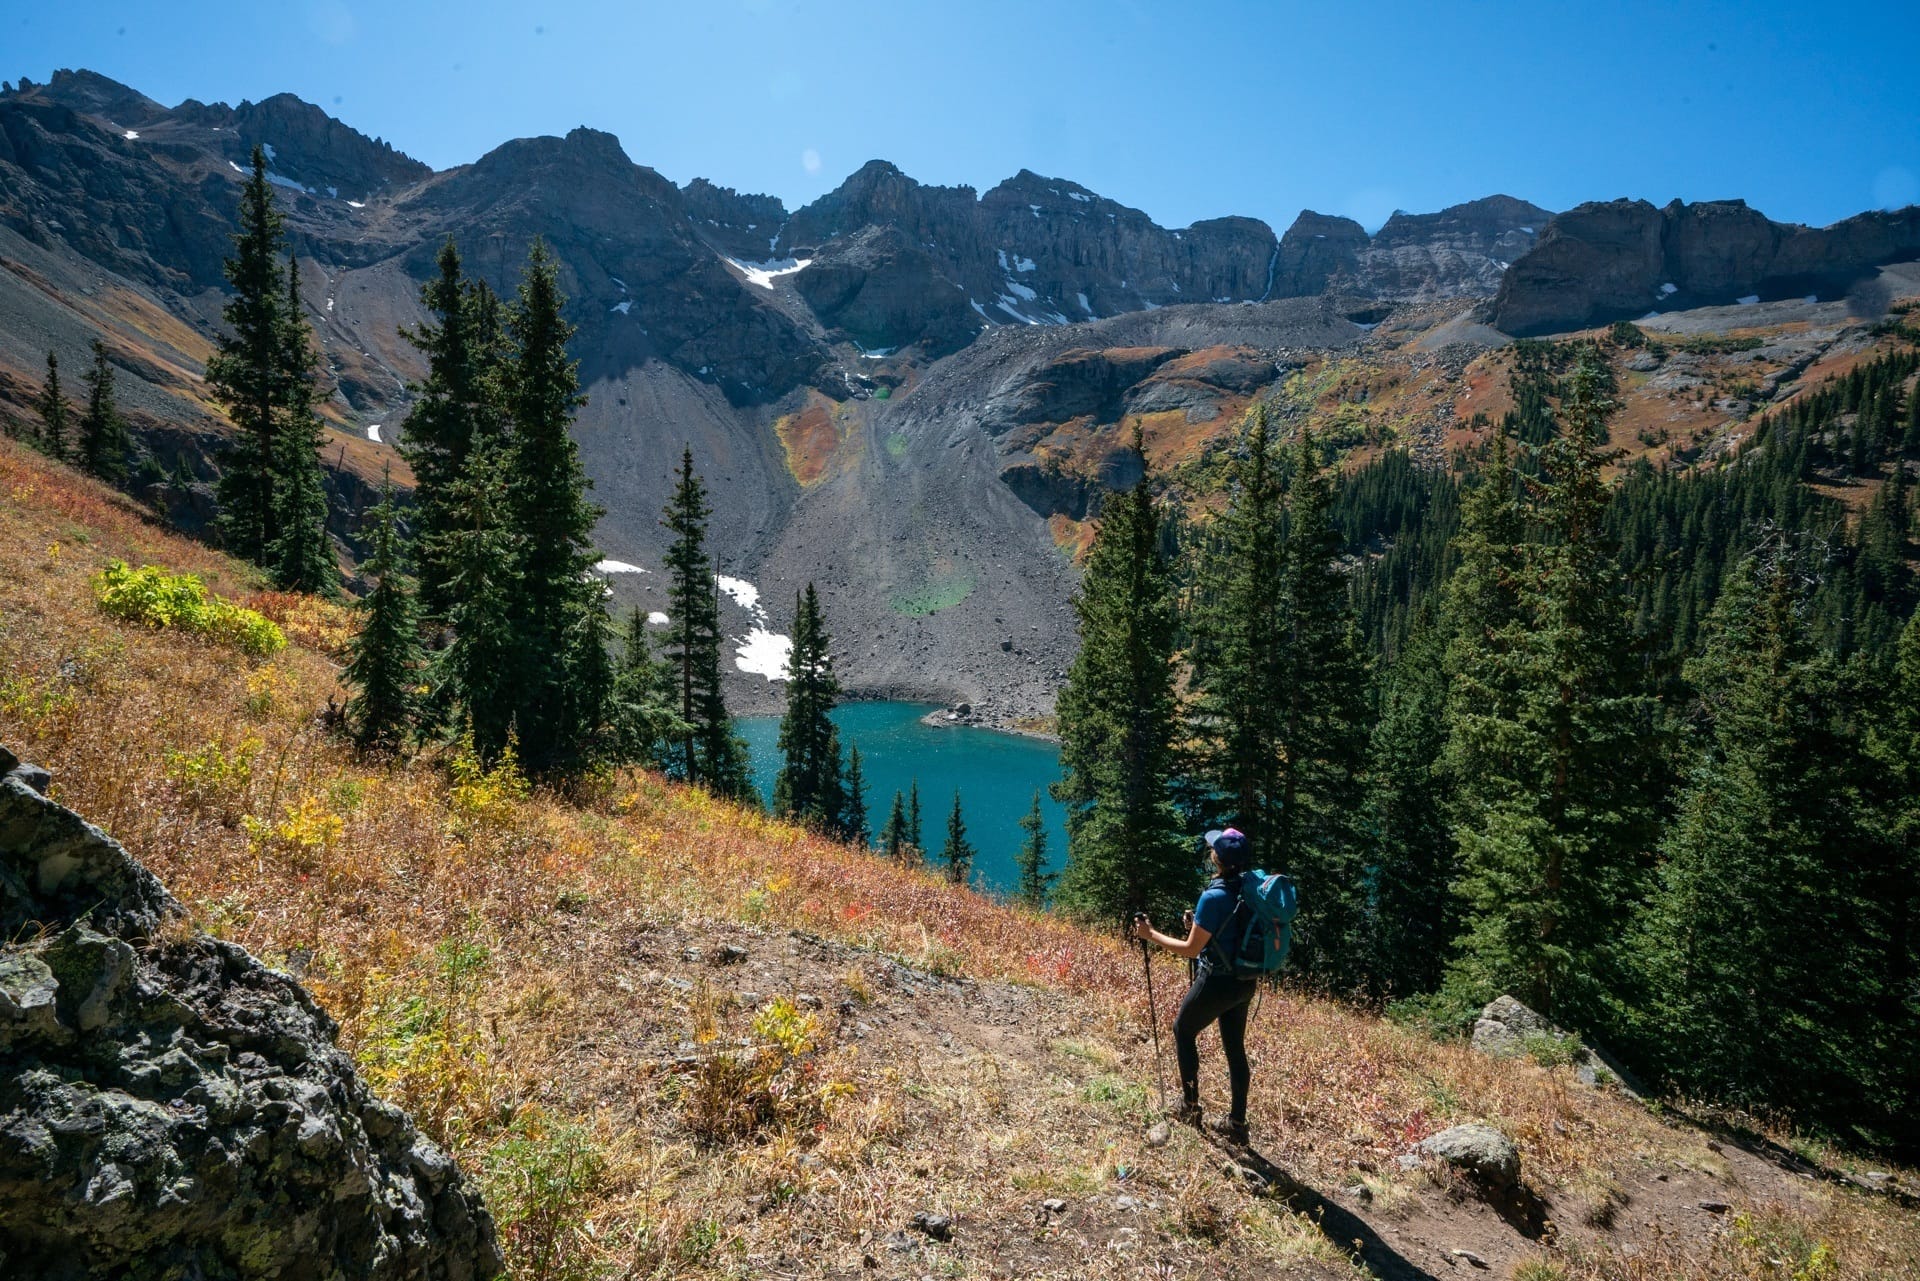 The Best Hiking Trails for Your Ultimate Outdoor Camping Adventure.